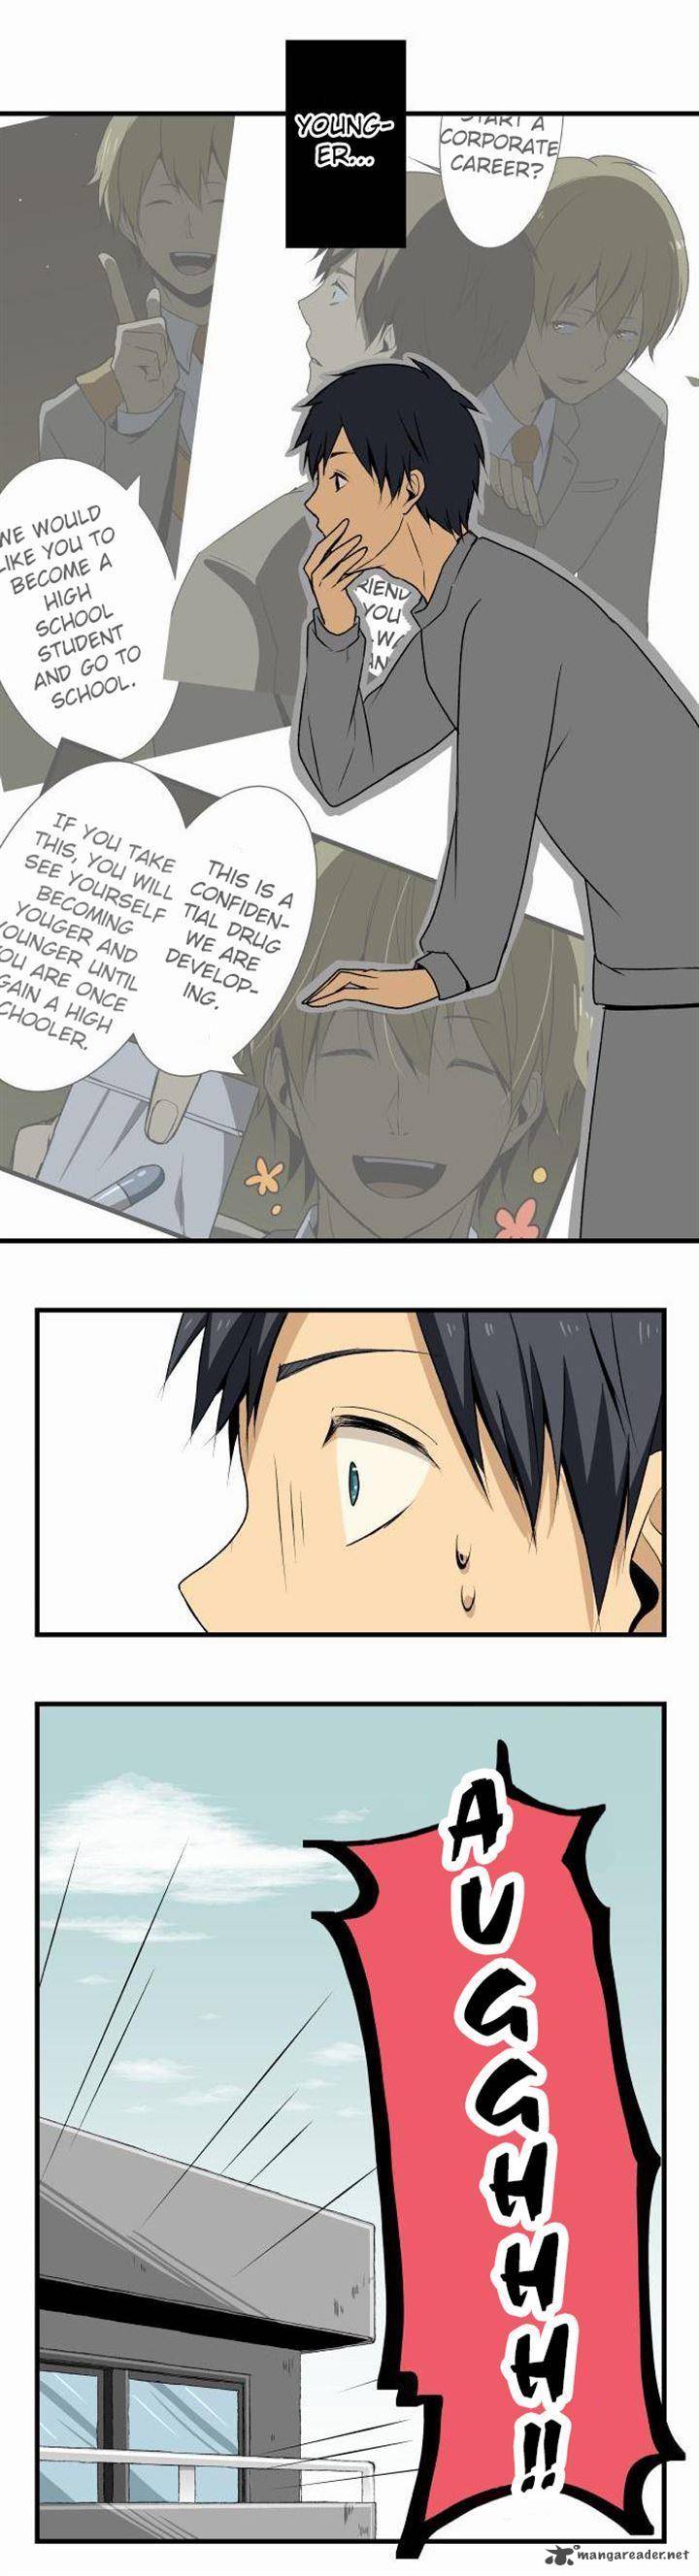 Relife Chapter 4 Page 4